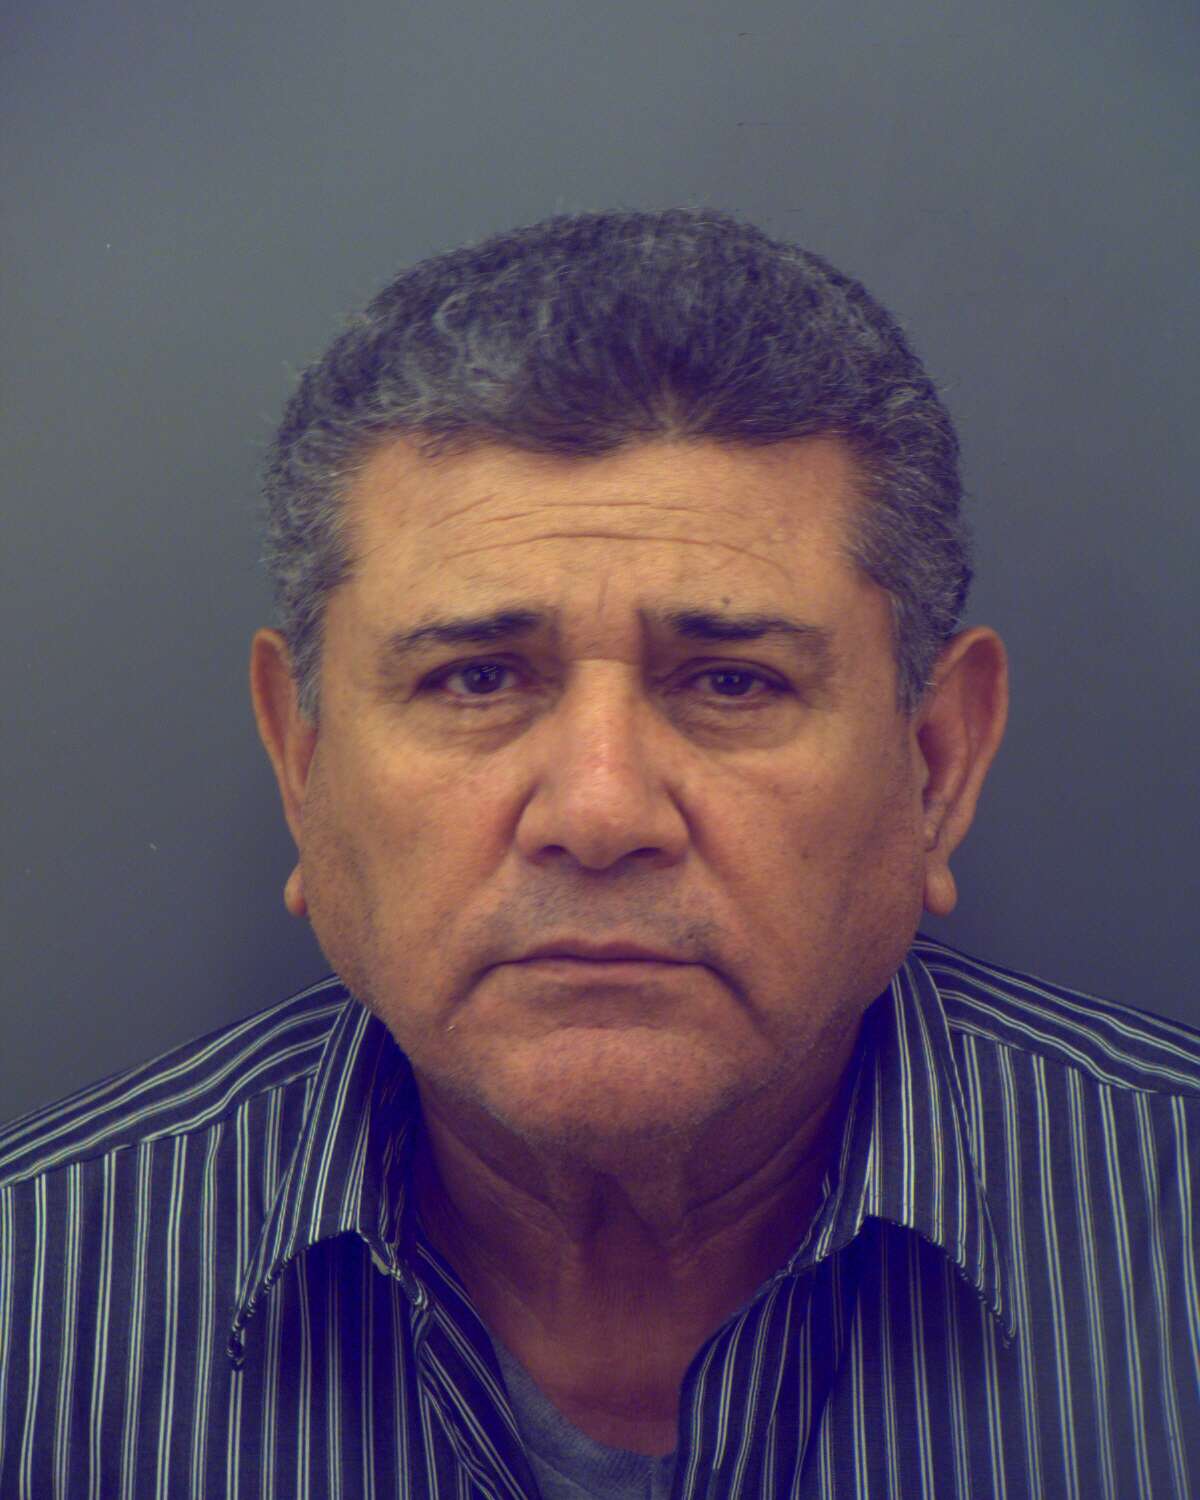 El Paso police arrested Noel Jimenez, a 69-year-old pastor at the Iglesia Alabanza y Adoracion church in El Paso, and charged him with sexual assault, according to a Thursday news release. He allegedly convinced an alleged victim to have sex with him as part of a "true religious ritual."